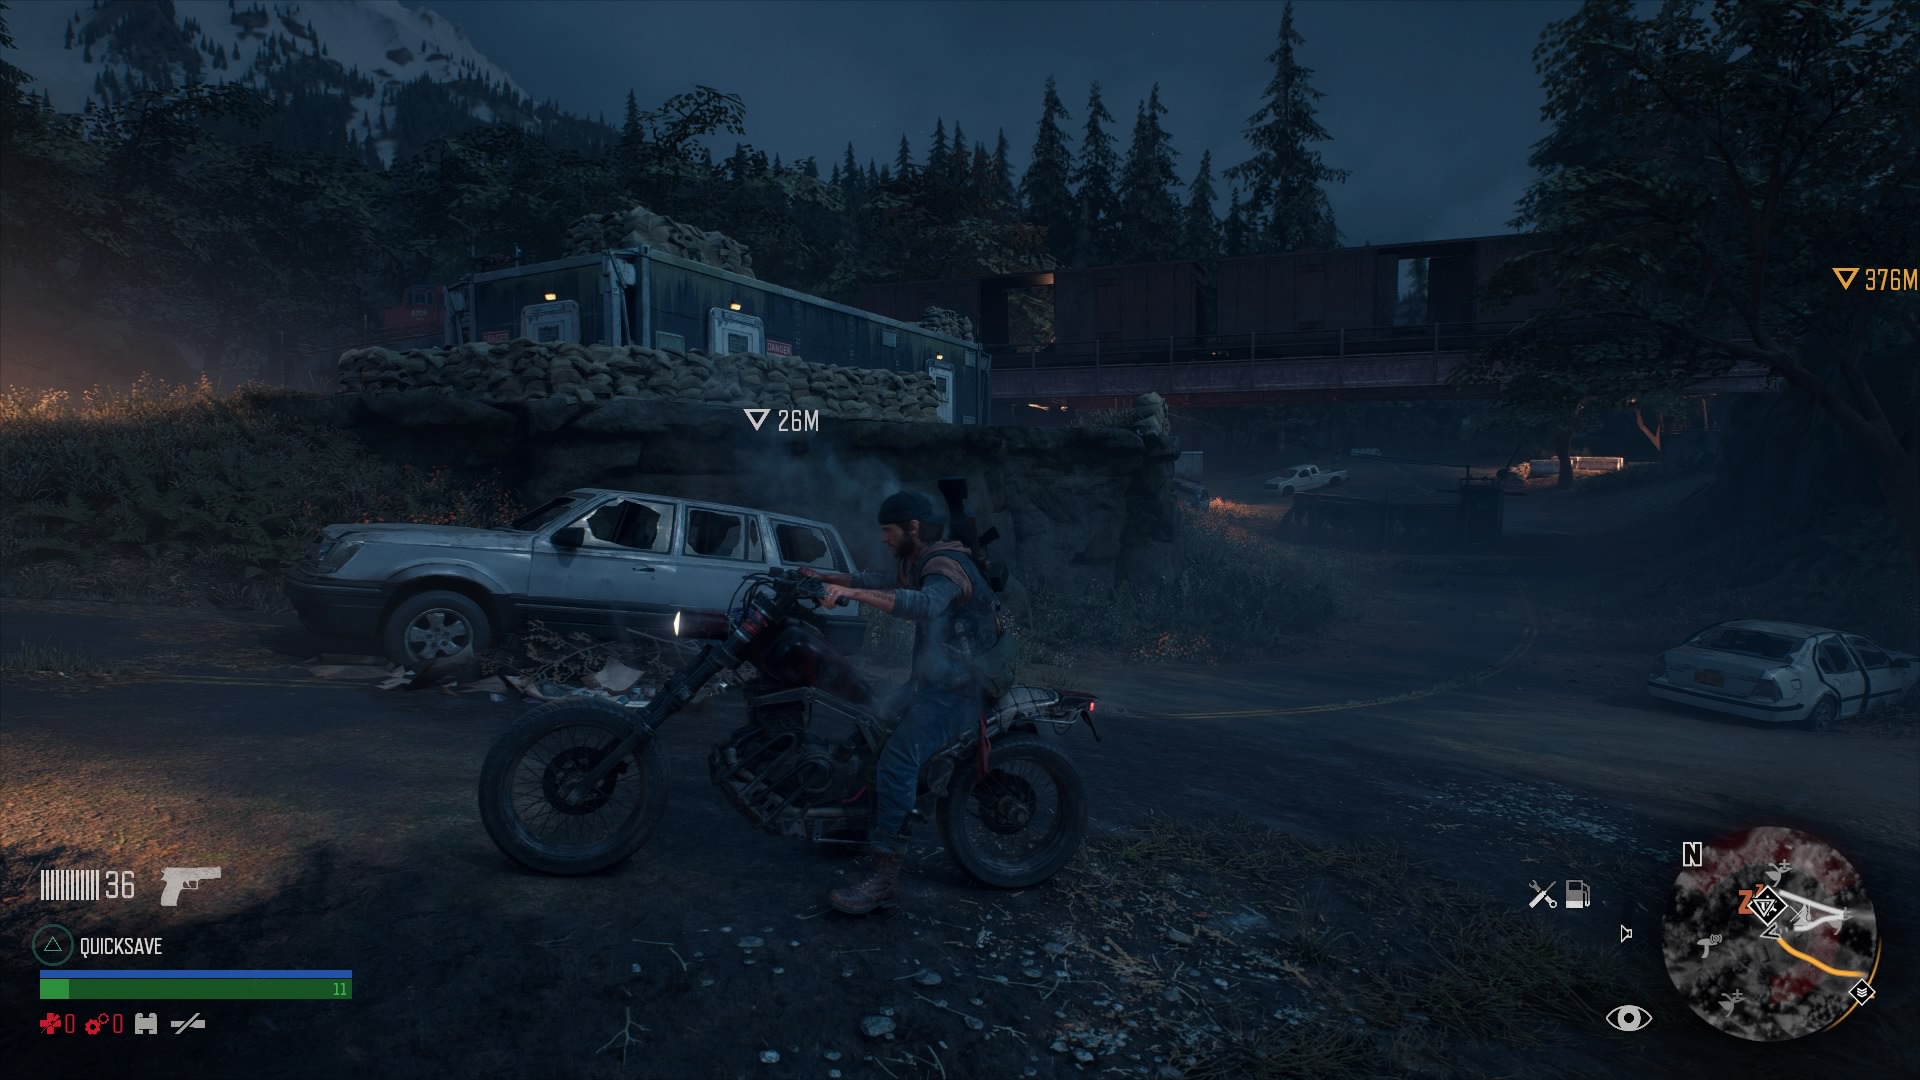 revision days gone ps4 20190425020240